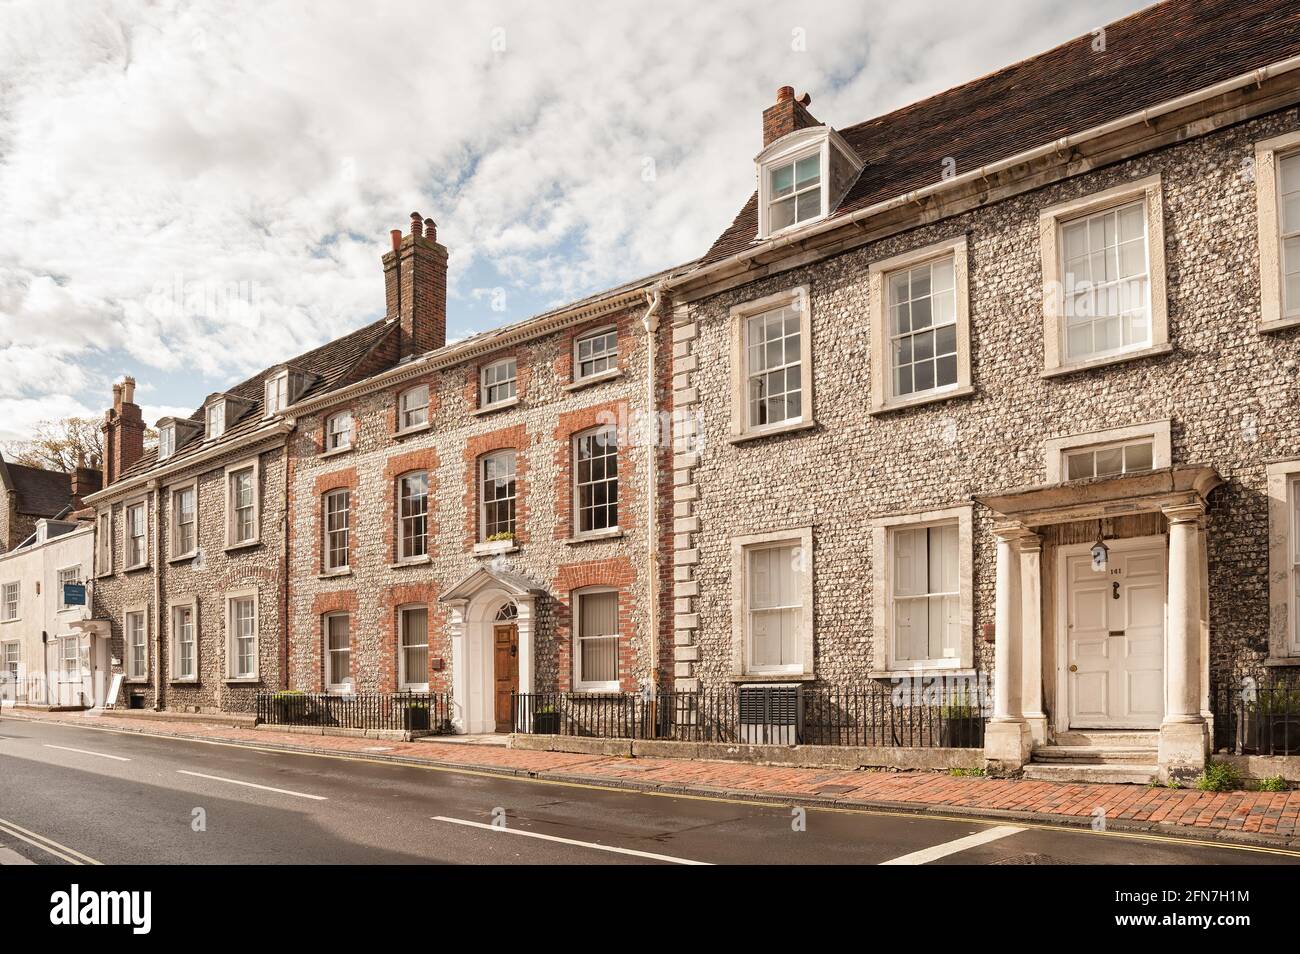 LEWES, EAST SUSSEX, UK - APRIL 29, 2012:  View of pretty buildings along the High Street and the diverse architecture Stock Photo